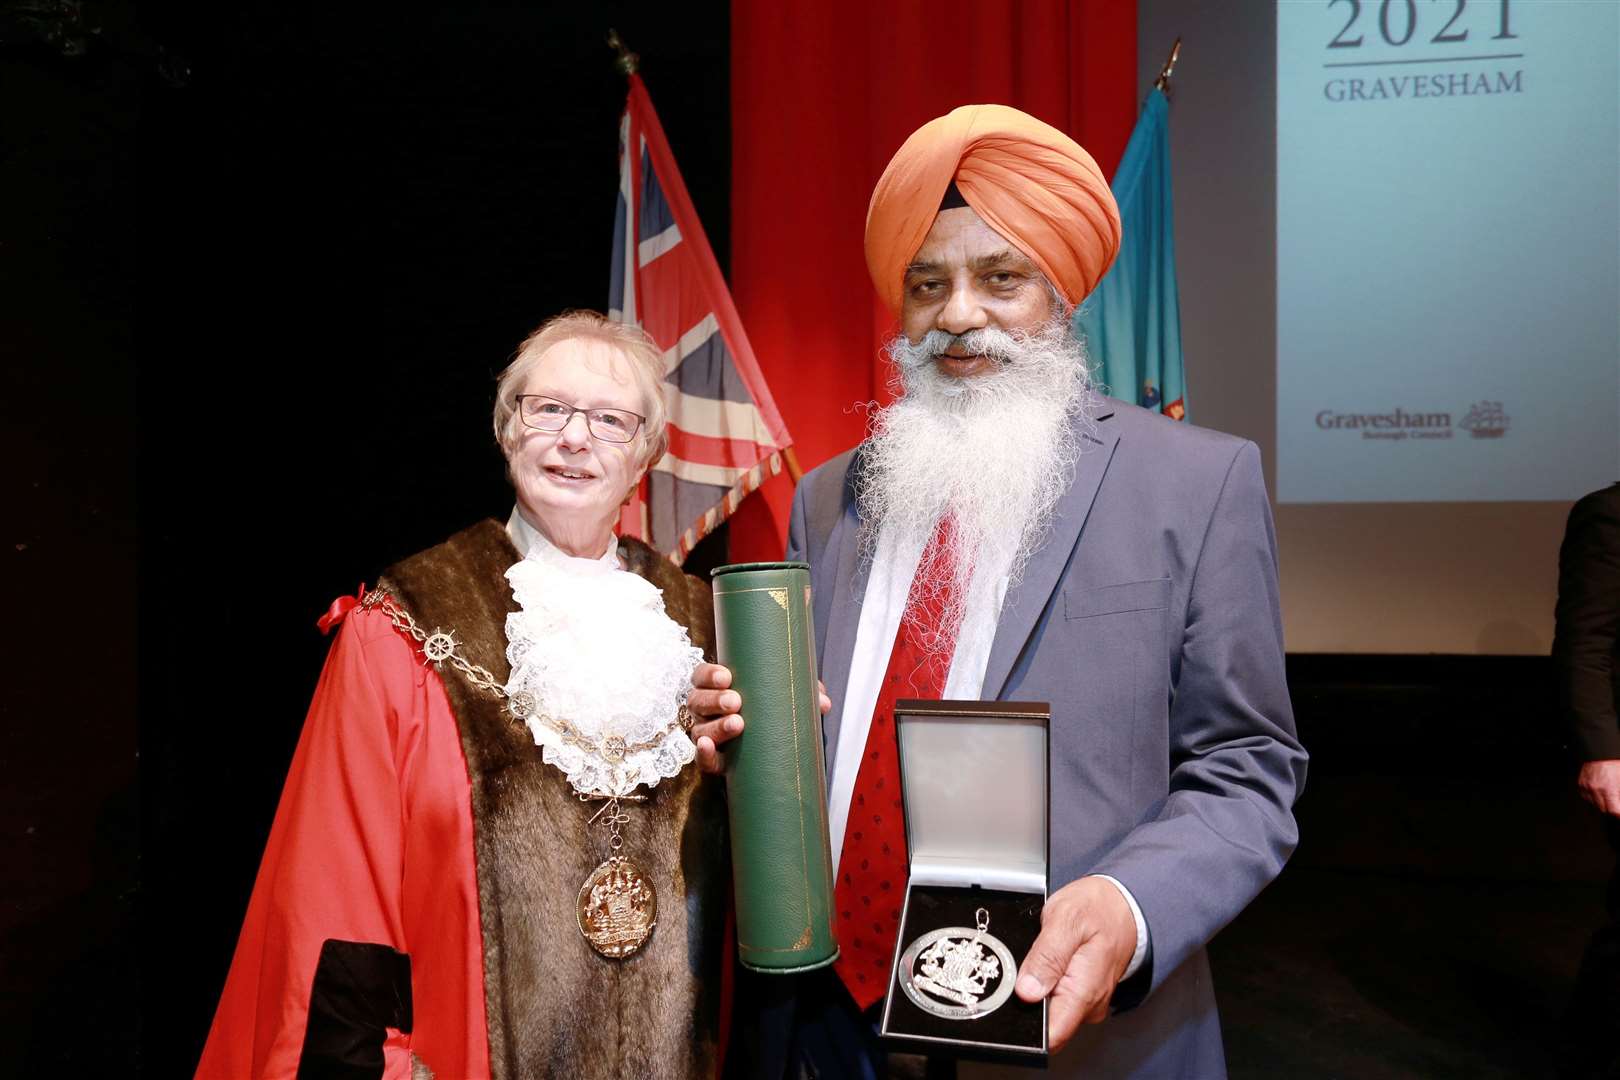 Mayor Cllr Lyn Milner congratulates Cllr Narinderjit Singh Thandi who was given Honorary Freedom of the Borough of Gravesham. Picture Phil Lee/Gravesham council